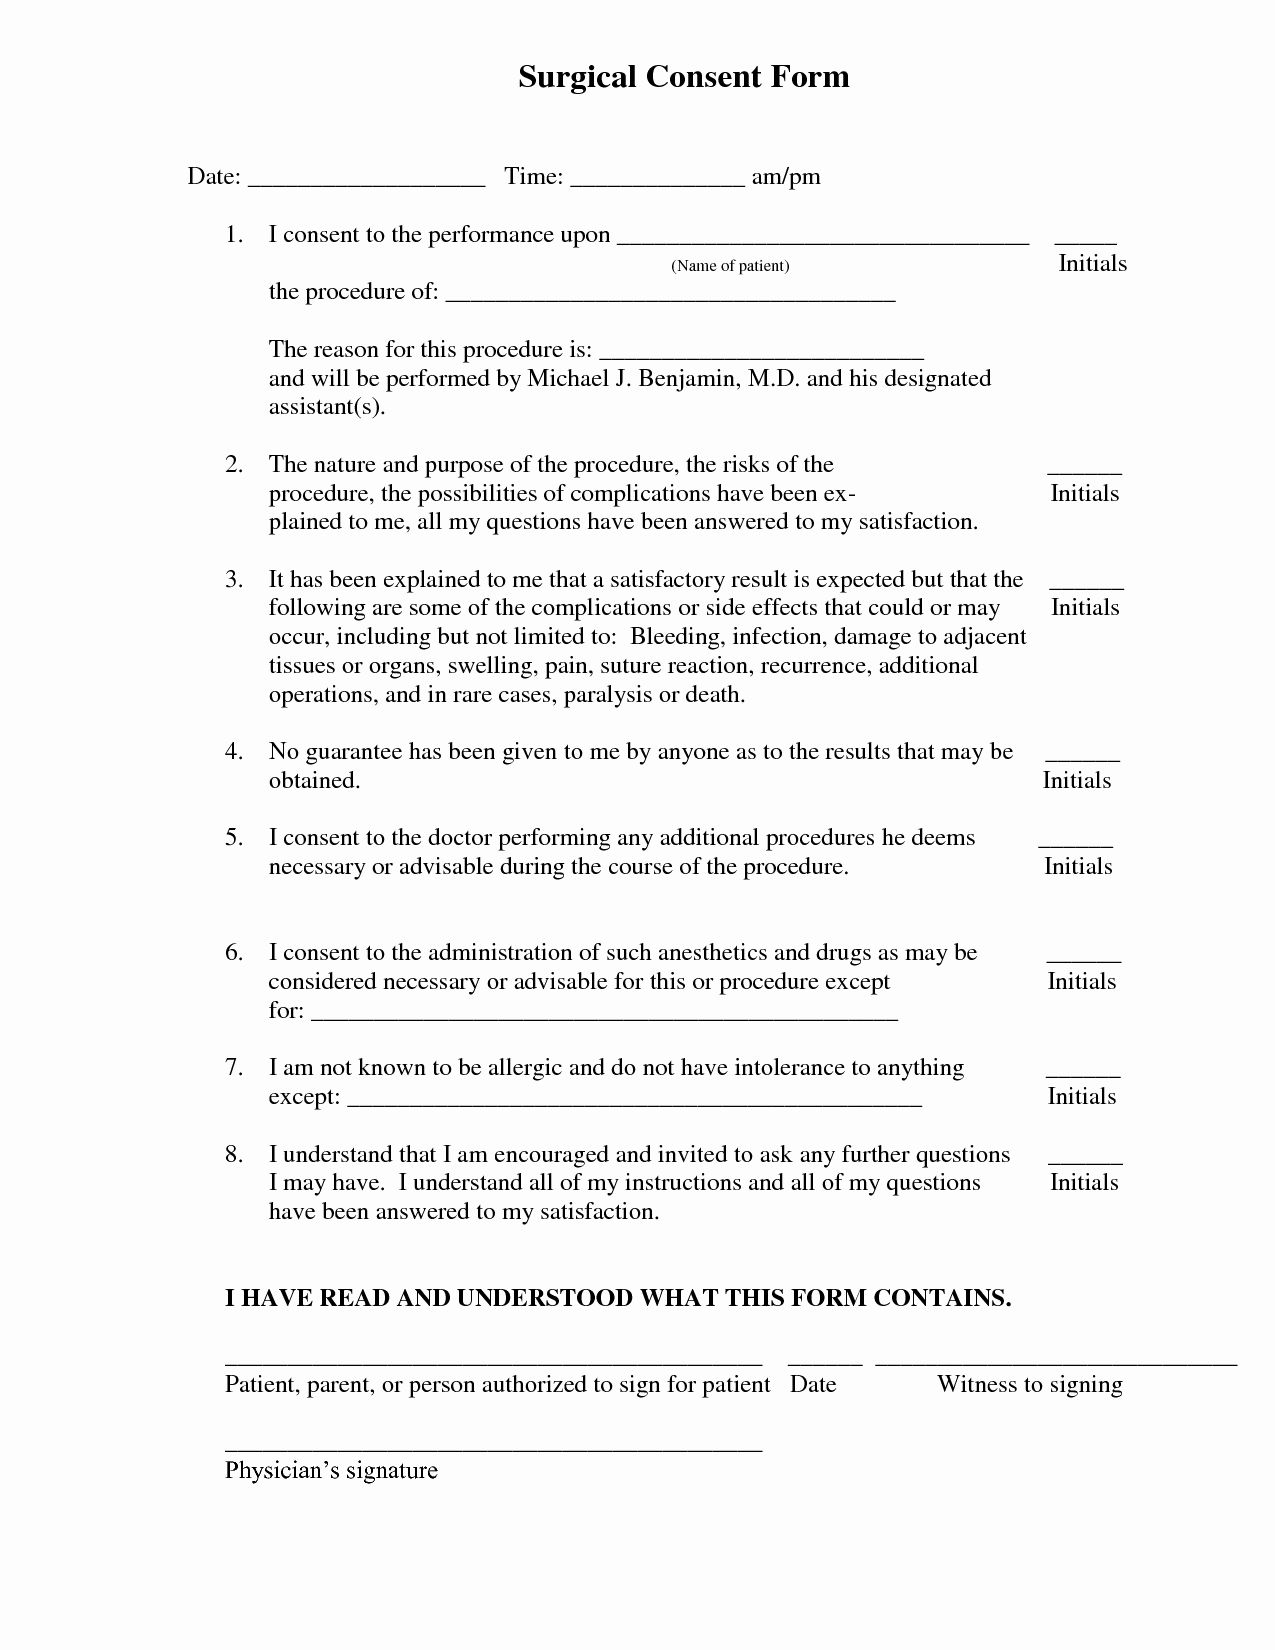 Medical Consent form Template Luxury Surgical Consent form Template Consent form